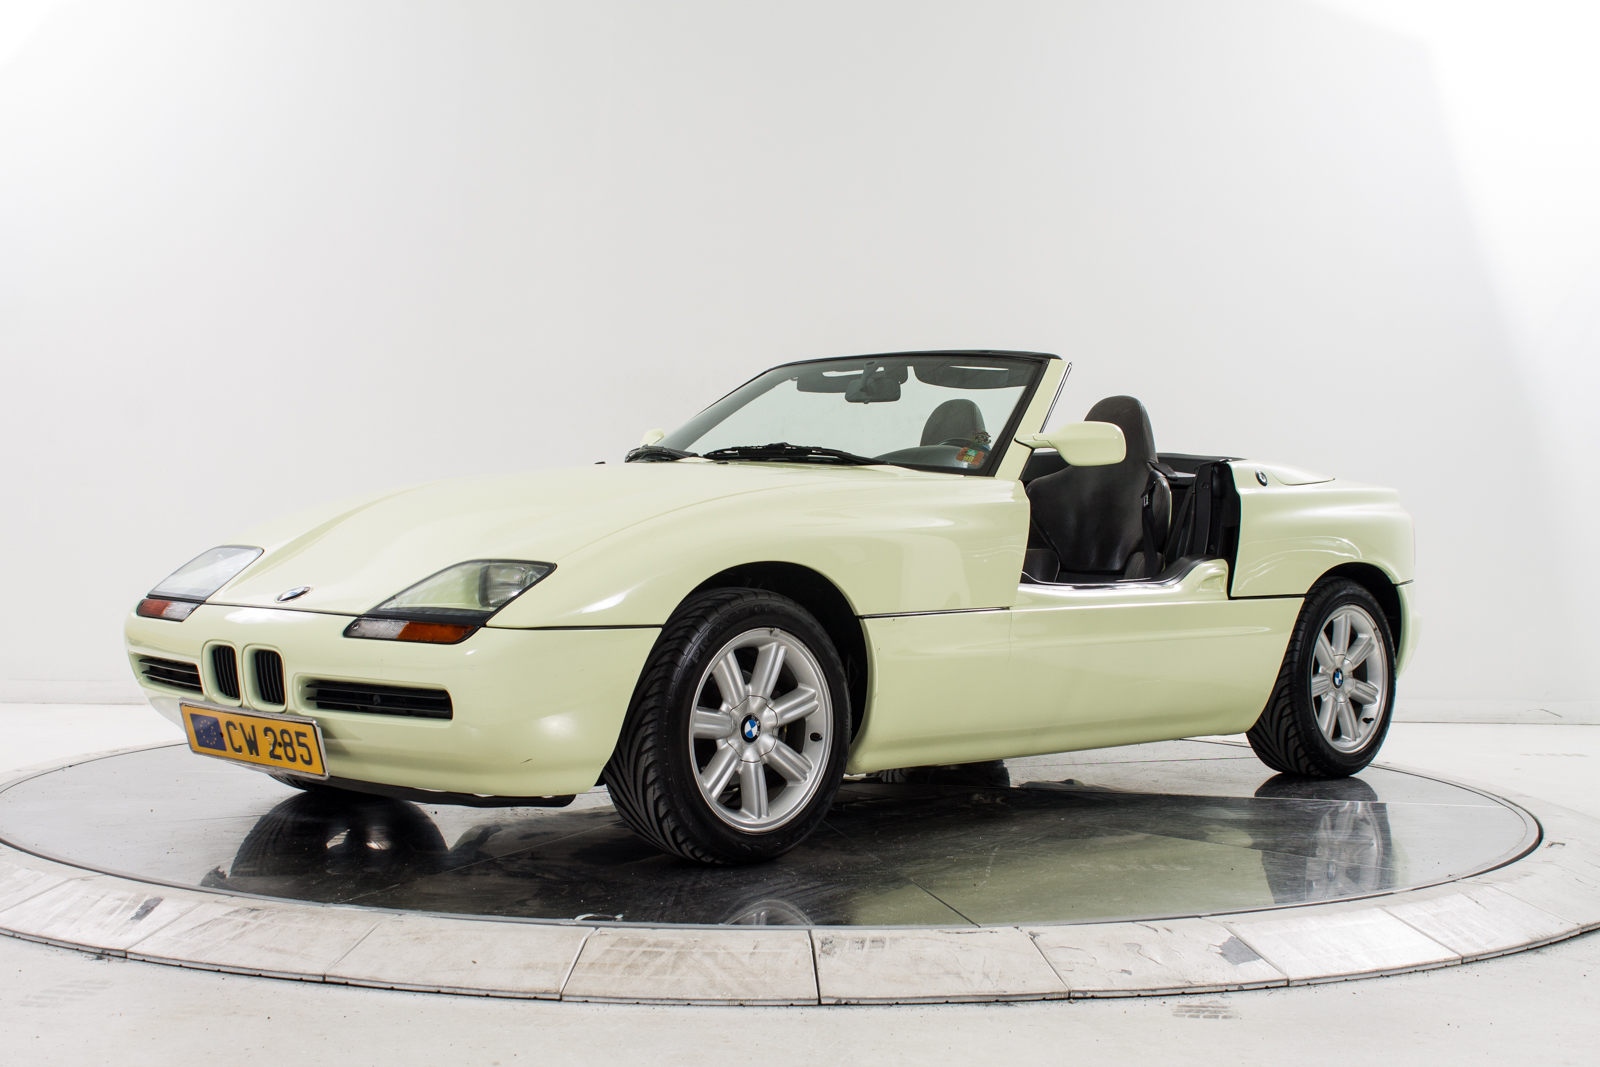 Low Mileage 1990 BMW Z1 Is Up for Grabs, Video Released